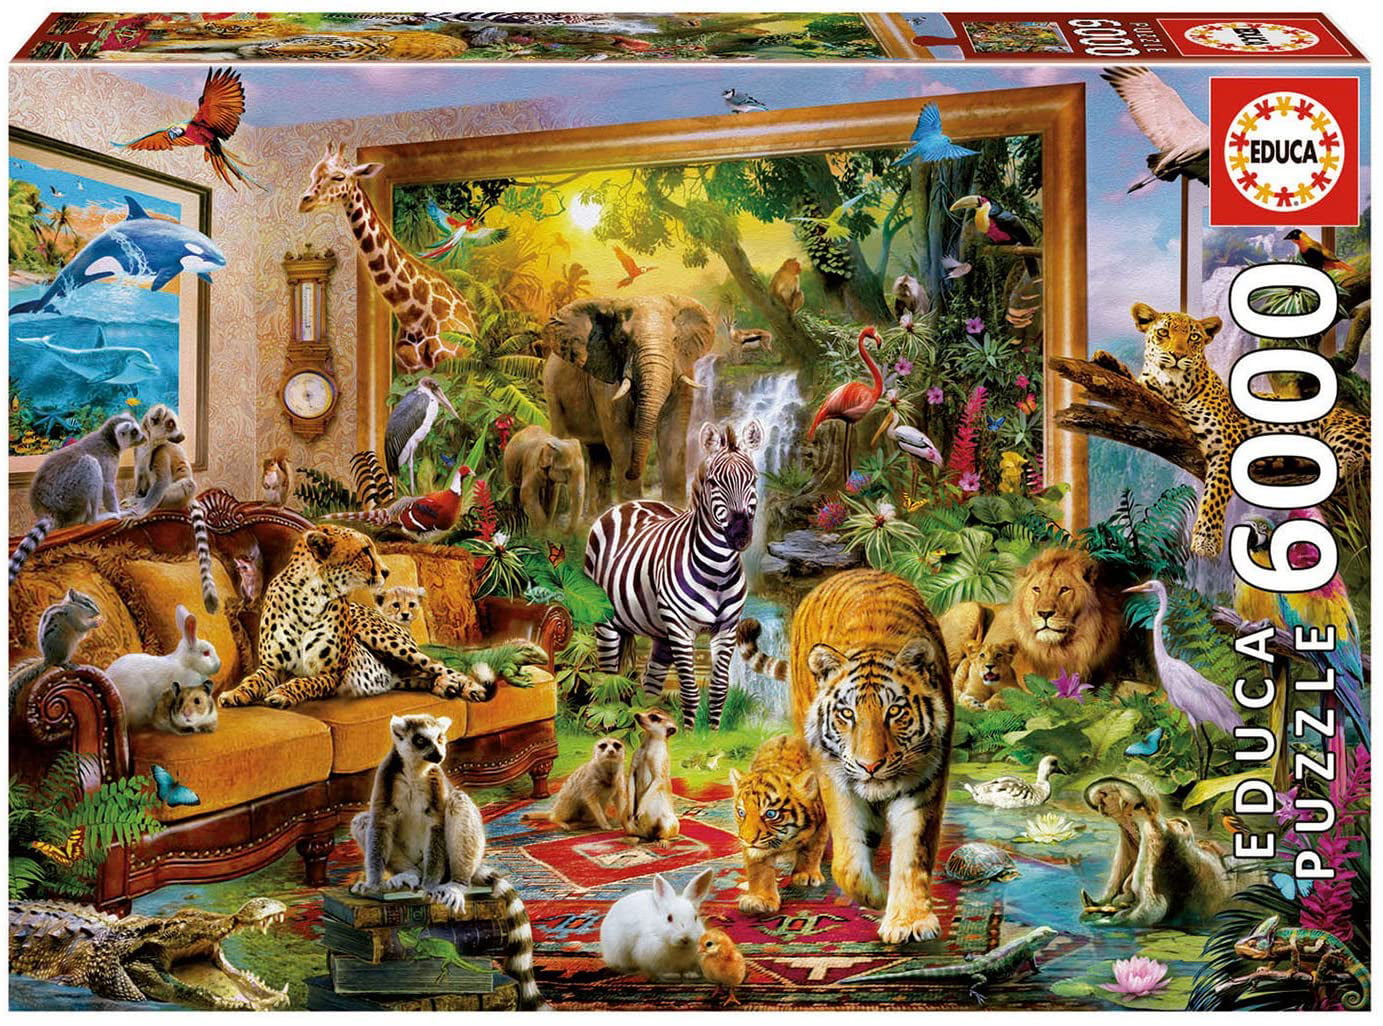 Puzzles for Adults 6000 Piece Beautiful Tree Every Piece is Unique & Pieces Fit Together Perfectly